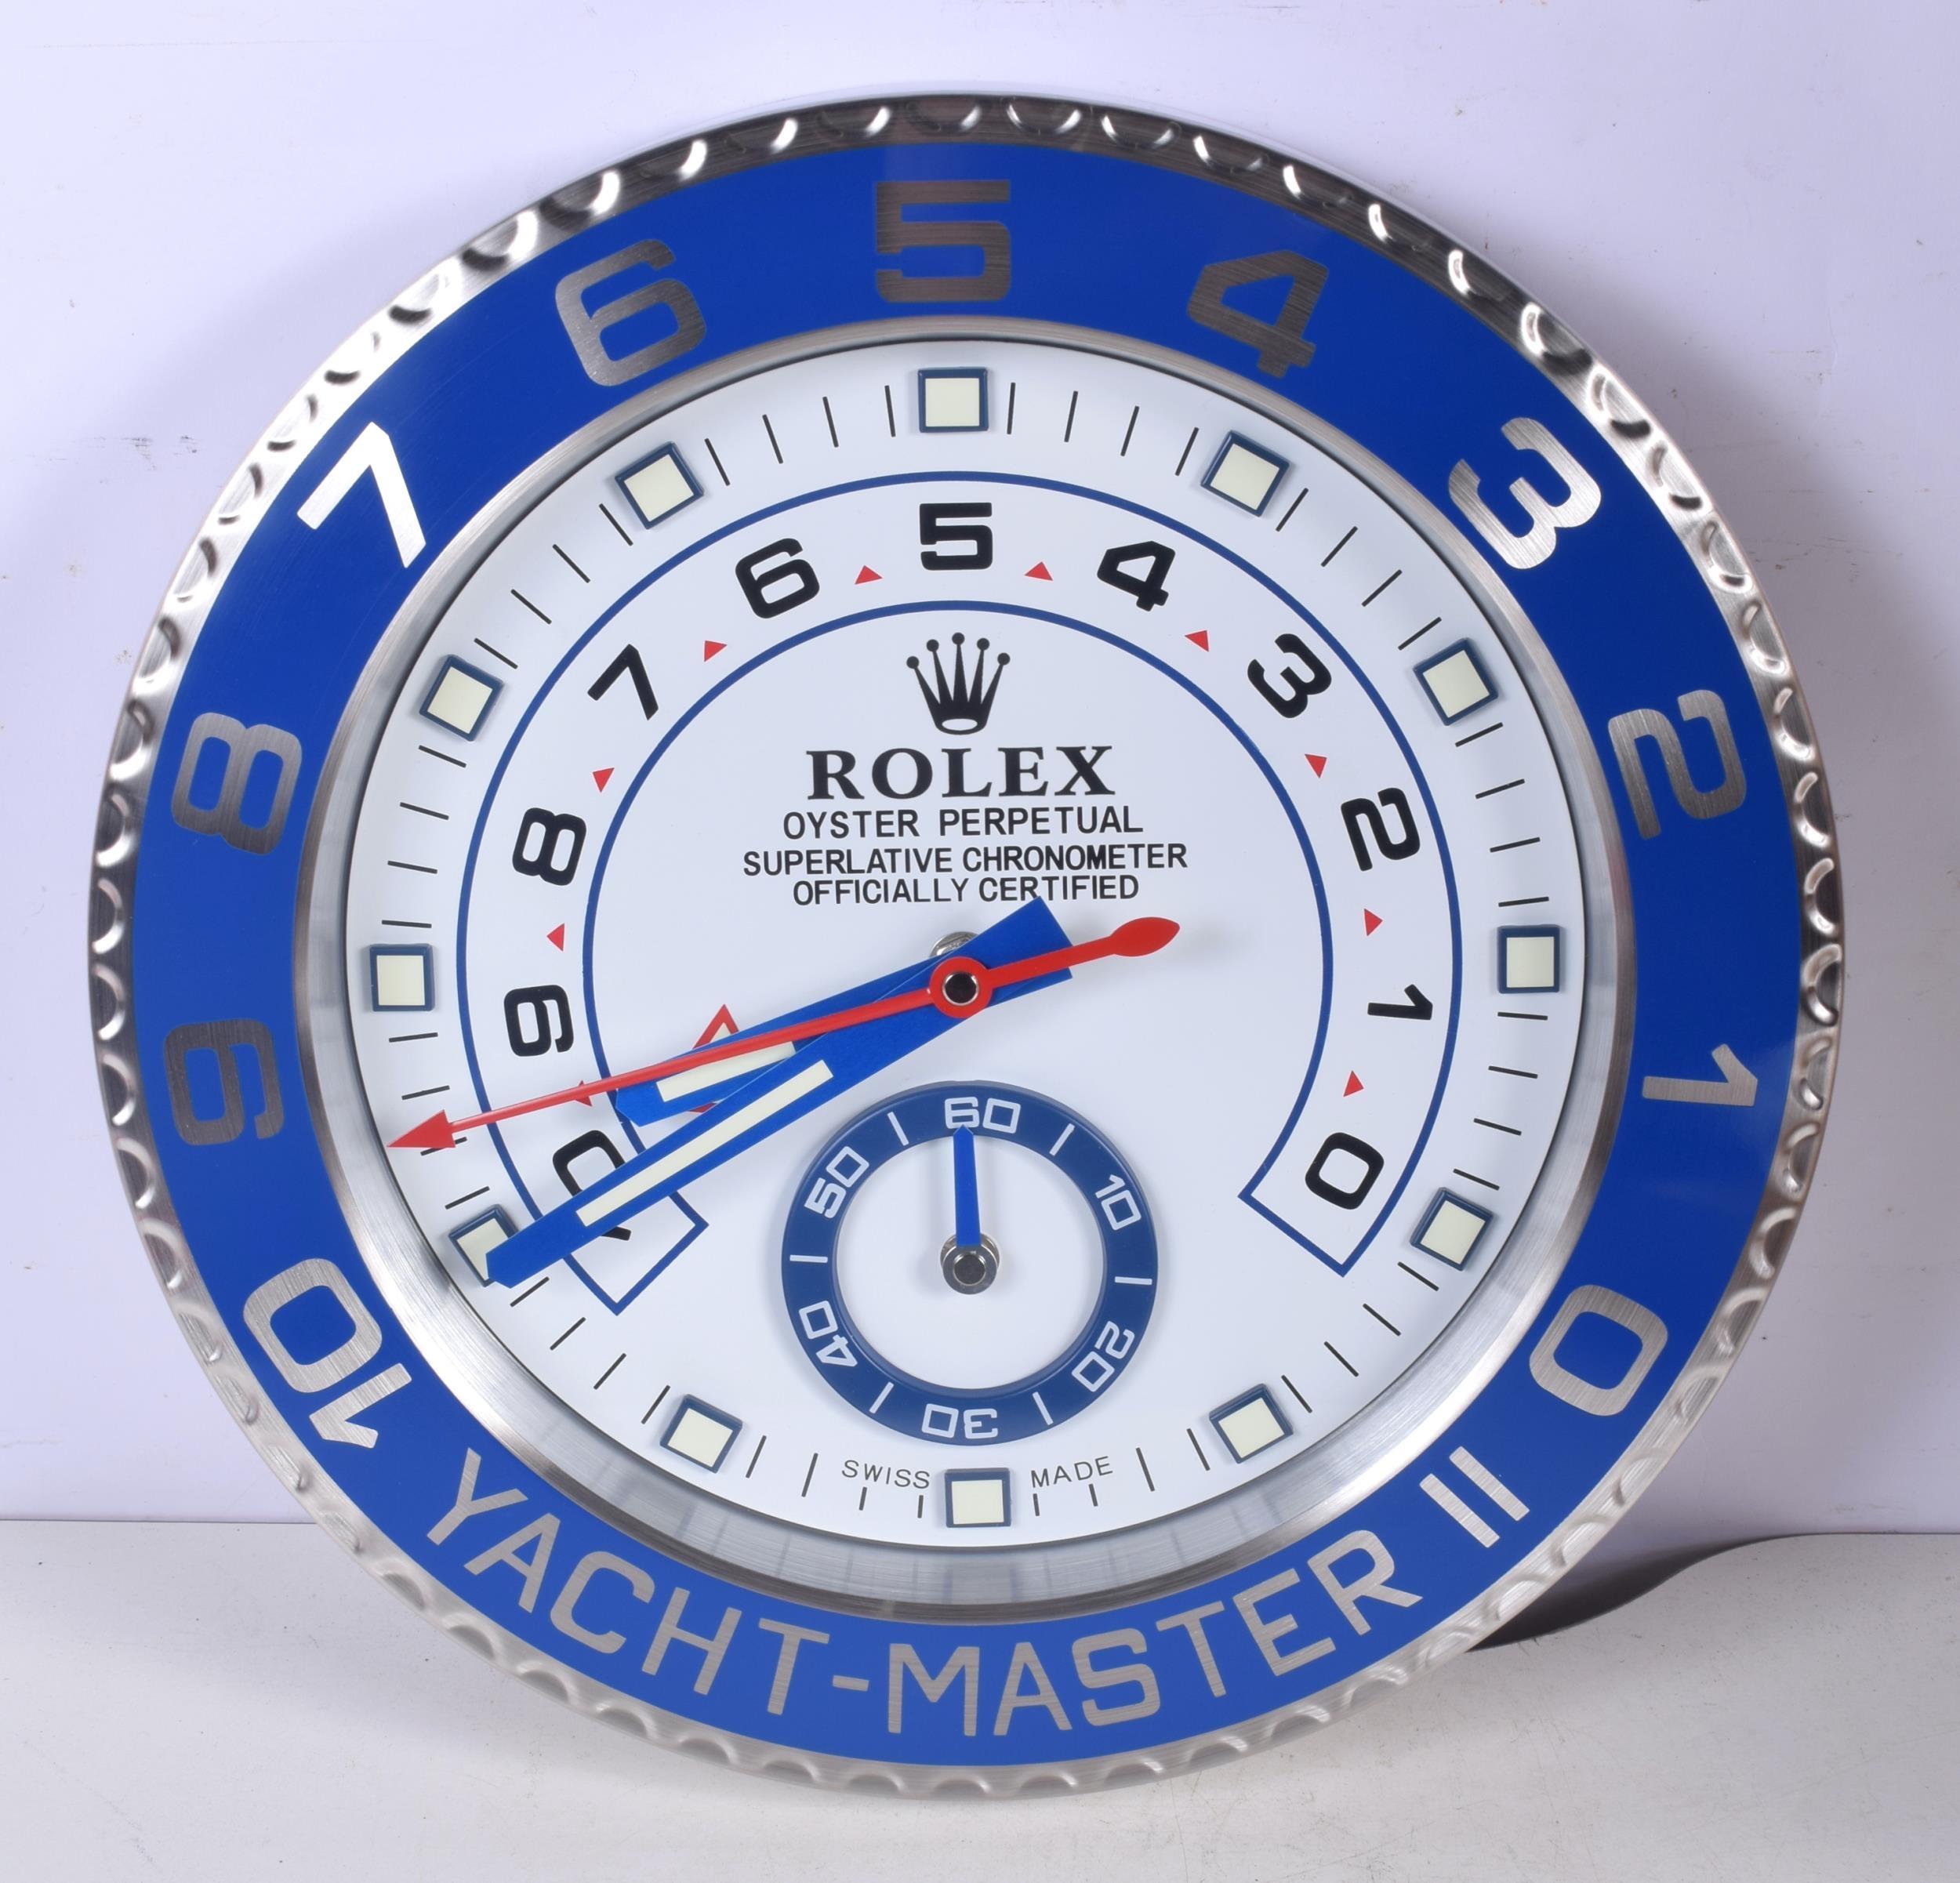 ROLEX Officially Certified Oyster Perpetual Yacht Master II Wall Clock 
Good condition, working.
Lume strips Sweeping Quartz movement powered by single AA Battery.
Clock dimensions measure approximately 35cm by 5cm thickness
Free international